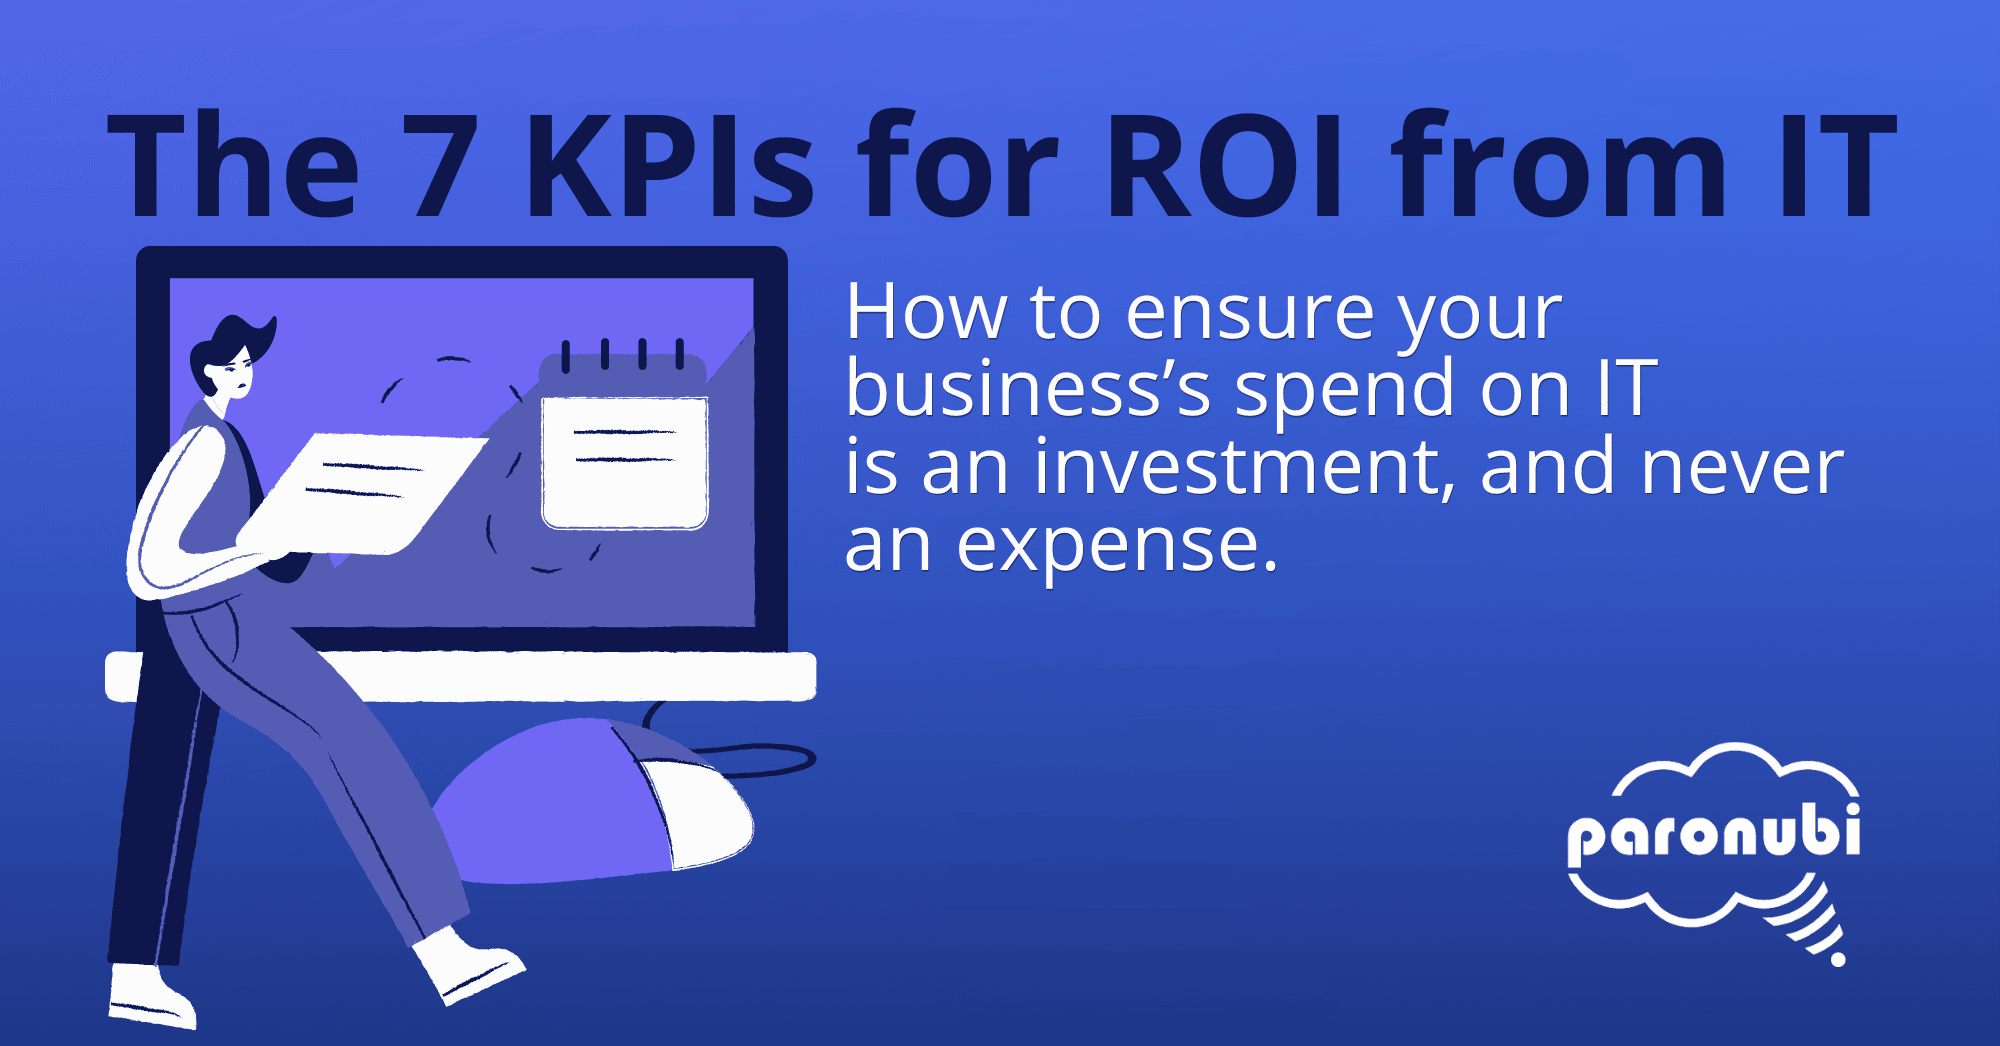 The 7 KPIs for ROI from IT - Blog image